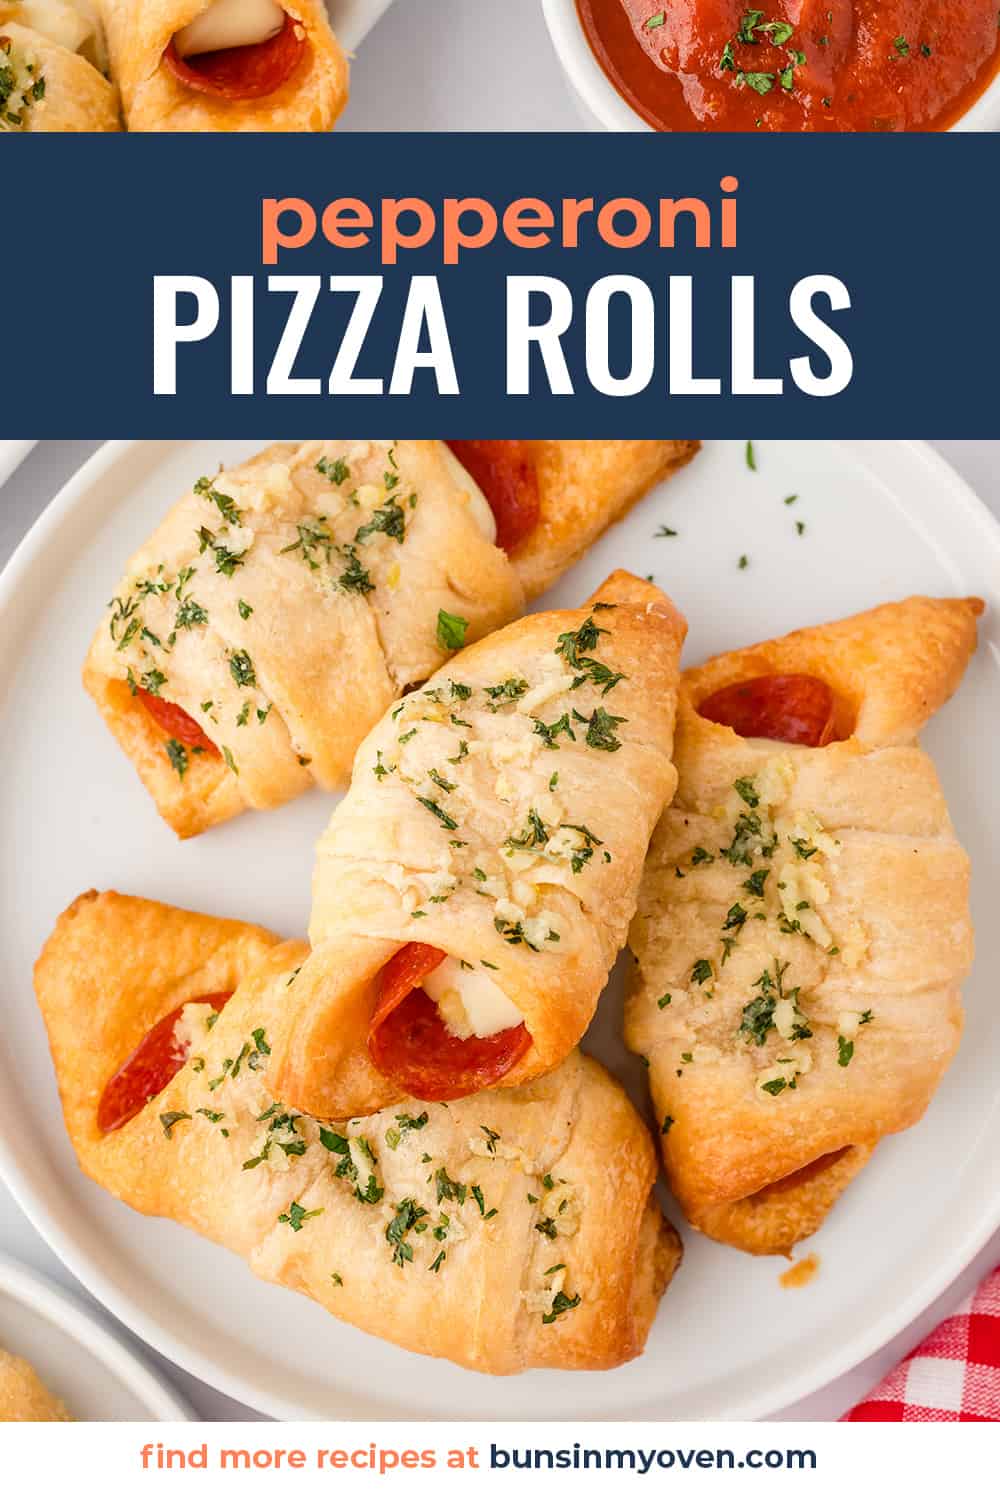 These homemade pizza rolls are stuffed with pepperoni and mozzarella cheese for a quick lunch or easy snack!